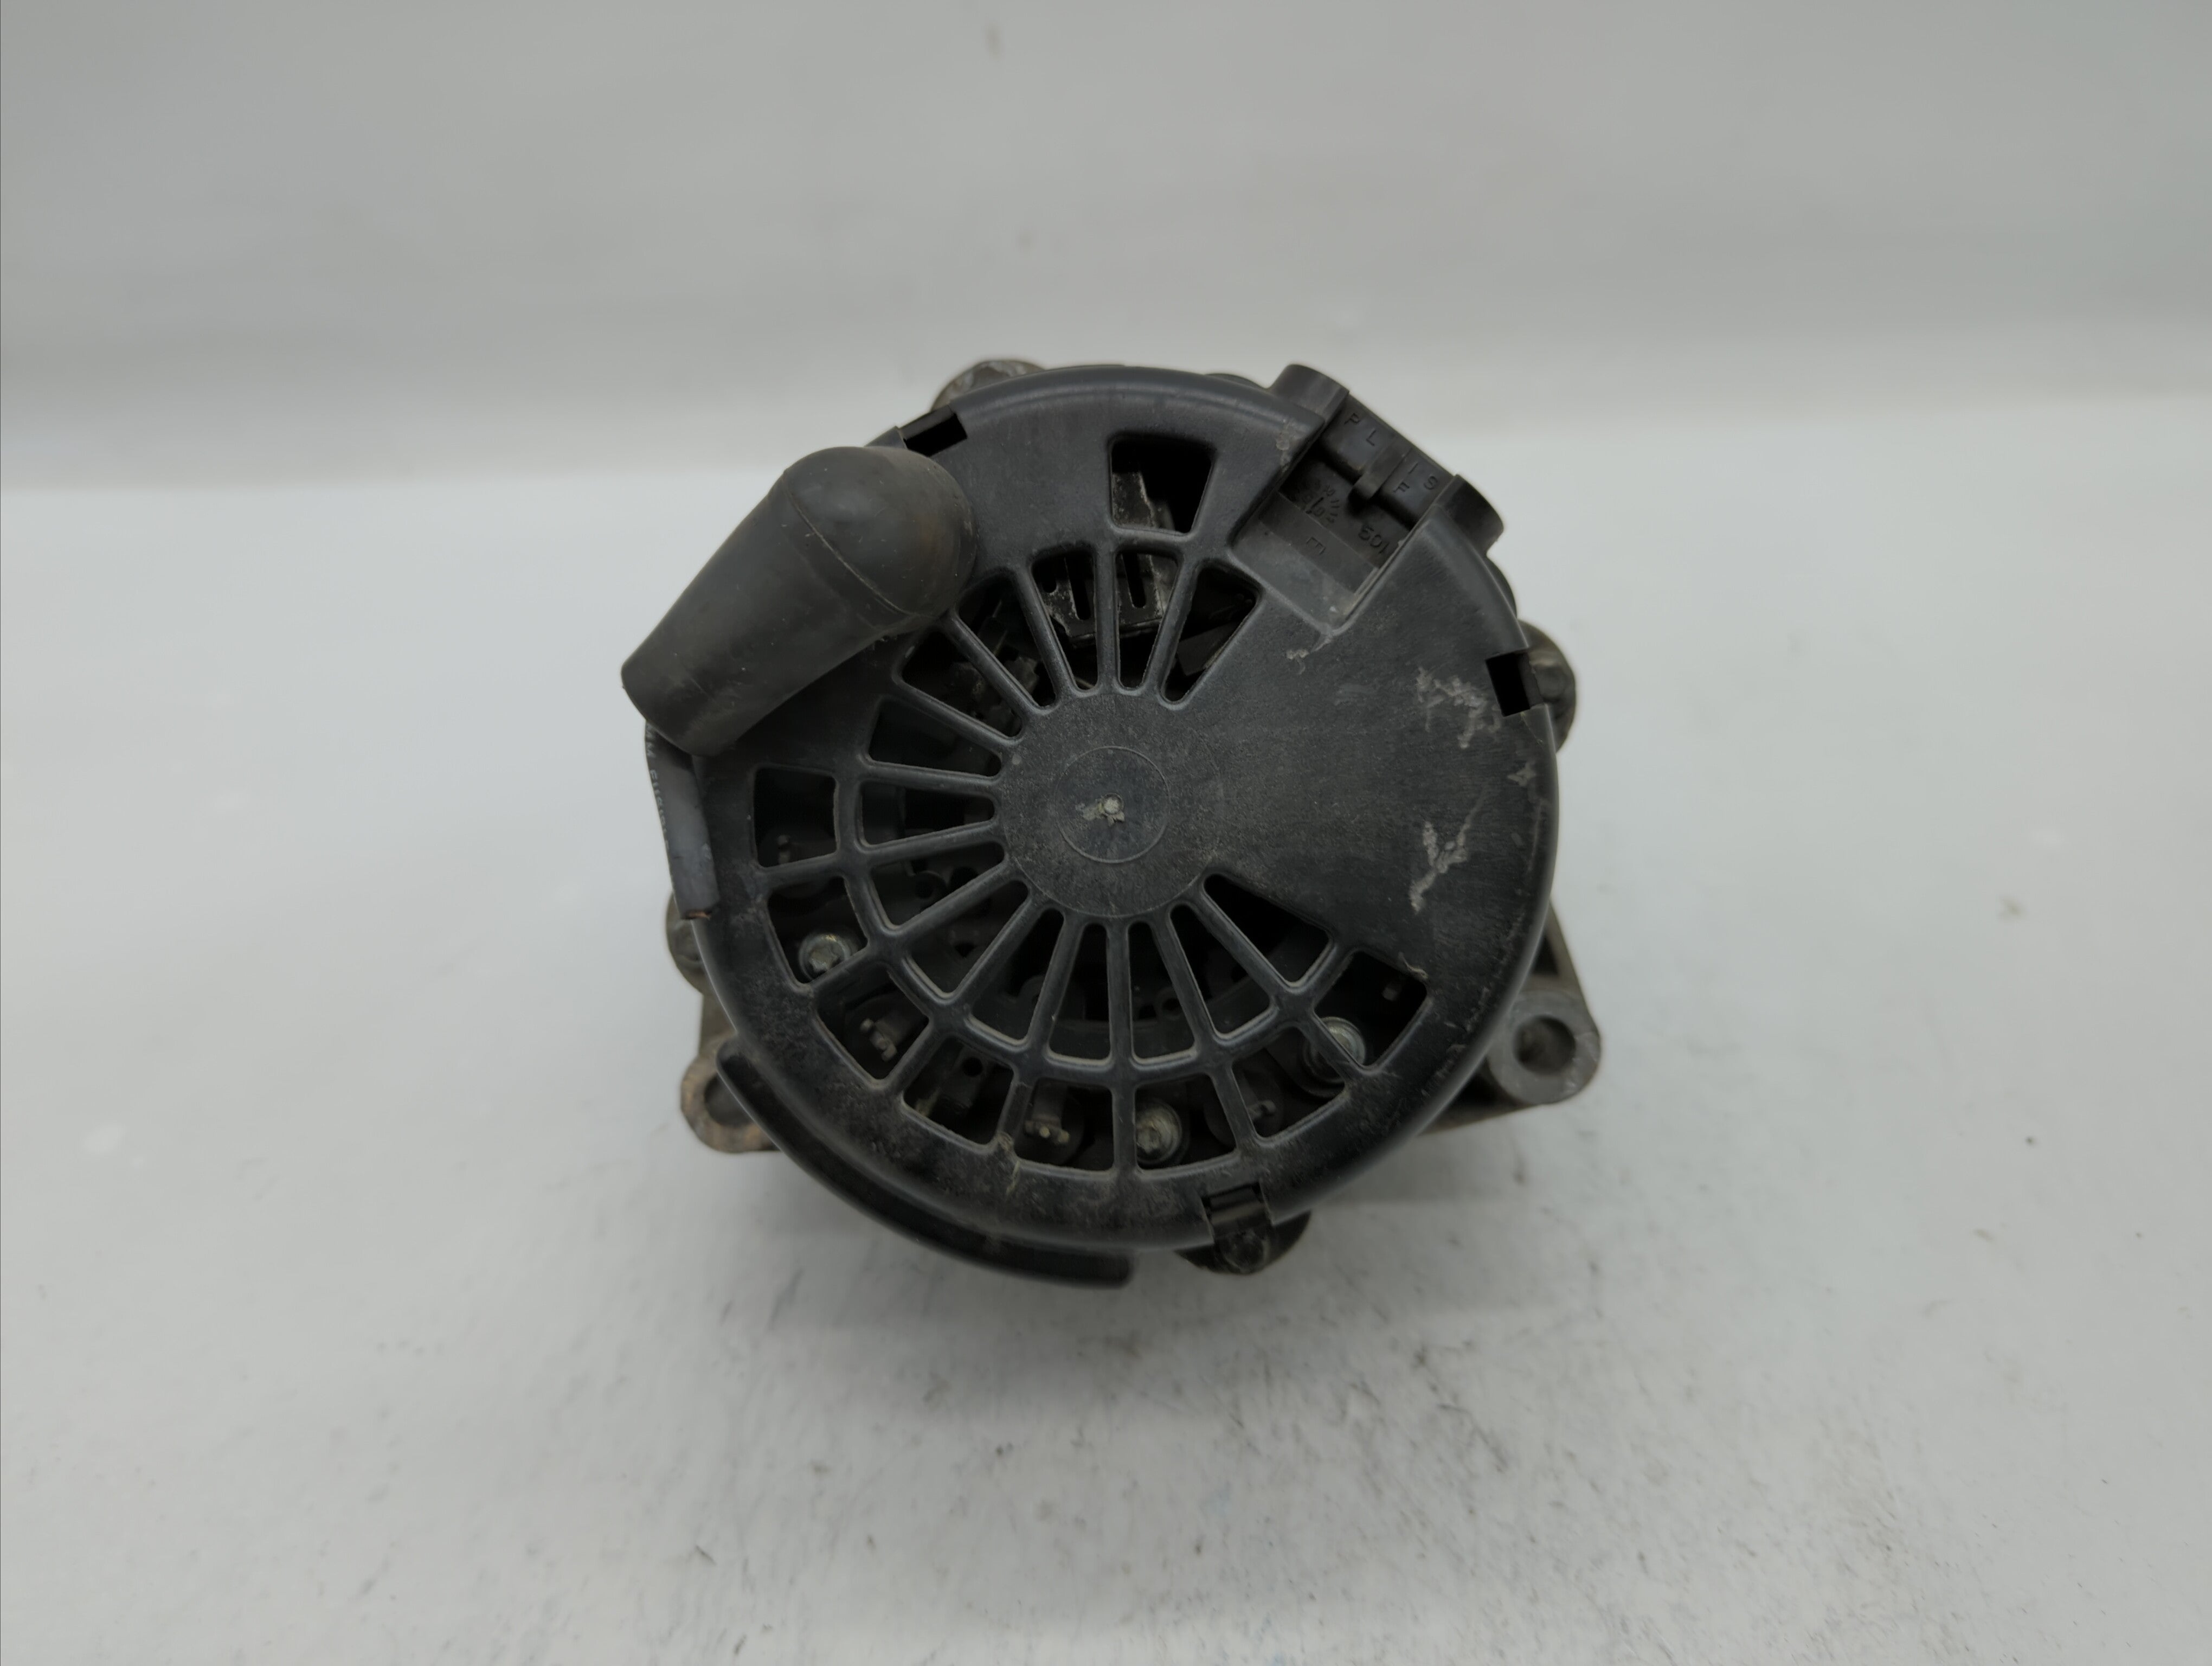 2000-2002 Chevrolet Silverado 1500 Alternator Replacement Generator Charging Assembly Engine OEM Fits 2000 2001 2002 2003 2004 OEM Used Auto Parts - Oemusedautoparts1.com